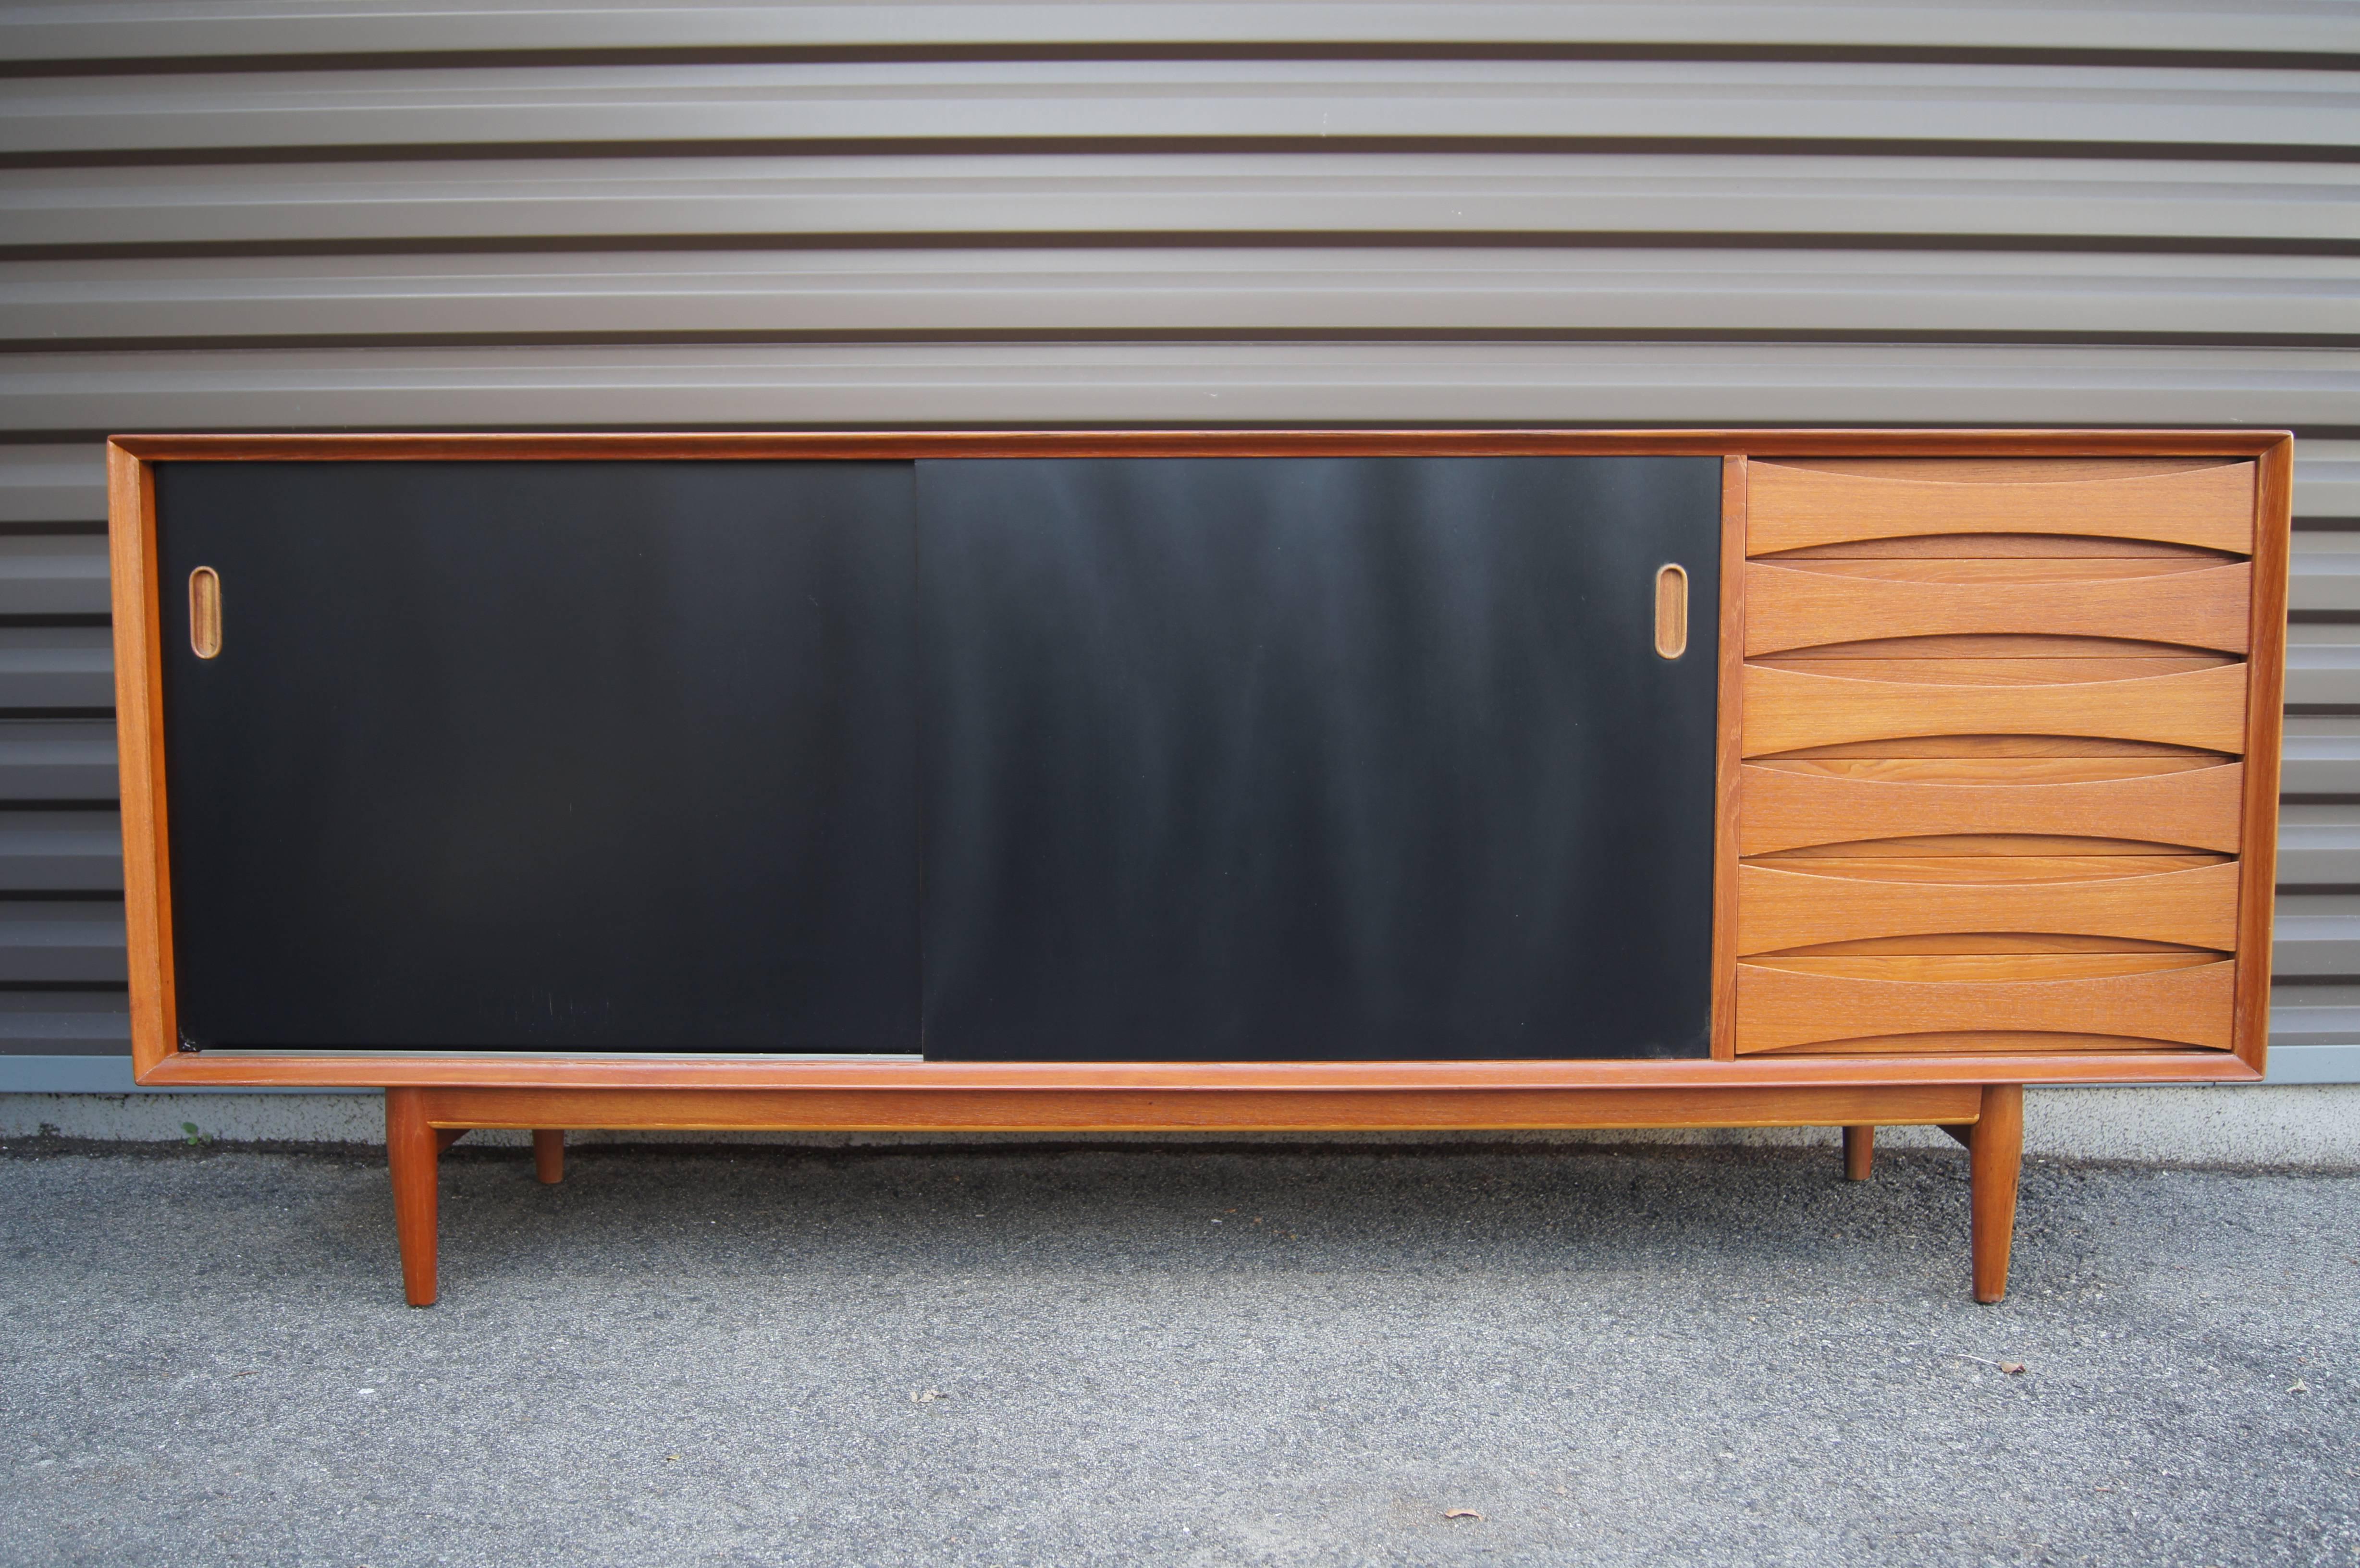 Designed by Arne Vodder for the Danish furniture company Sibast, this modern sideboard comprises a teak case on a plinth base. The sliding doors are reversible to any combination of teak or black lacquer fronts; inside the shelves are adjustable. To